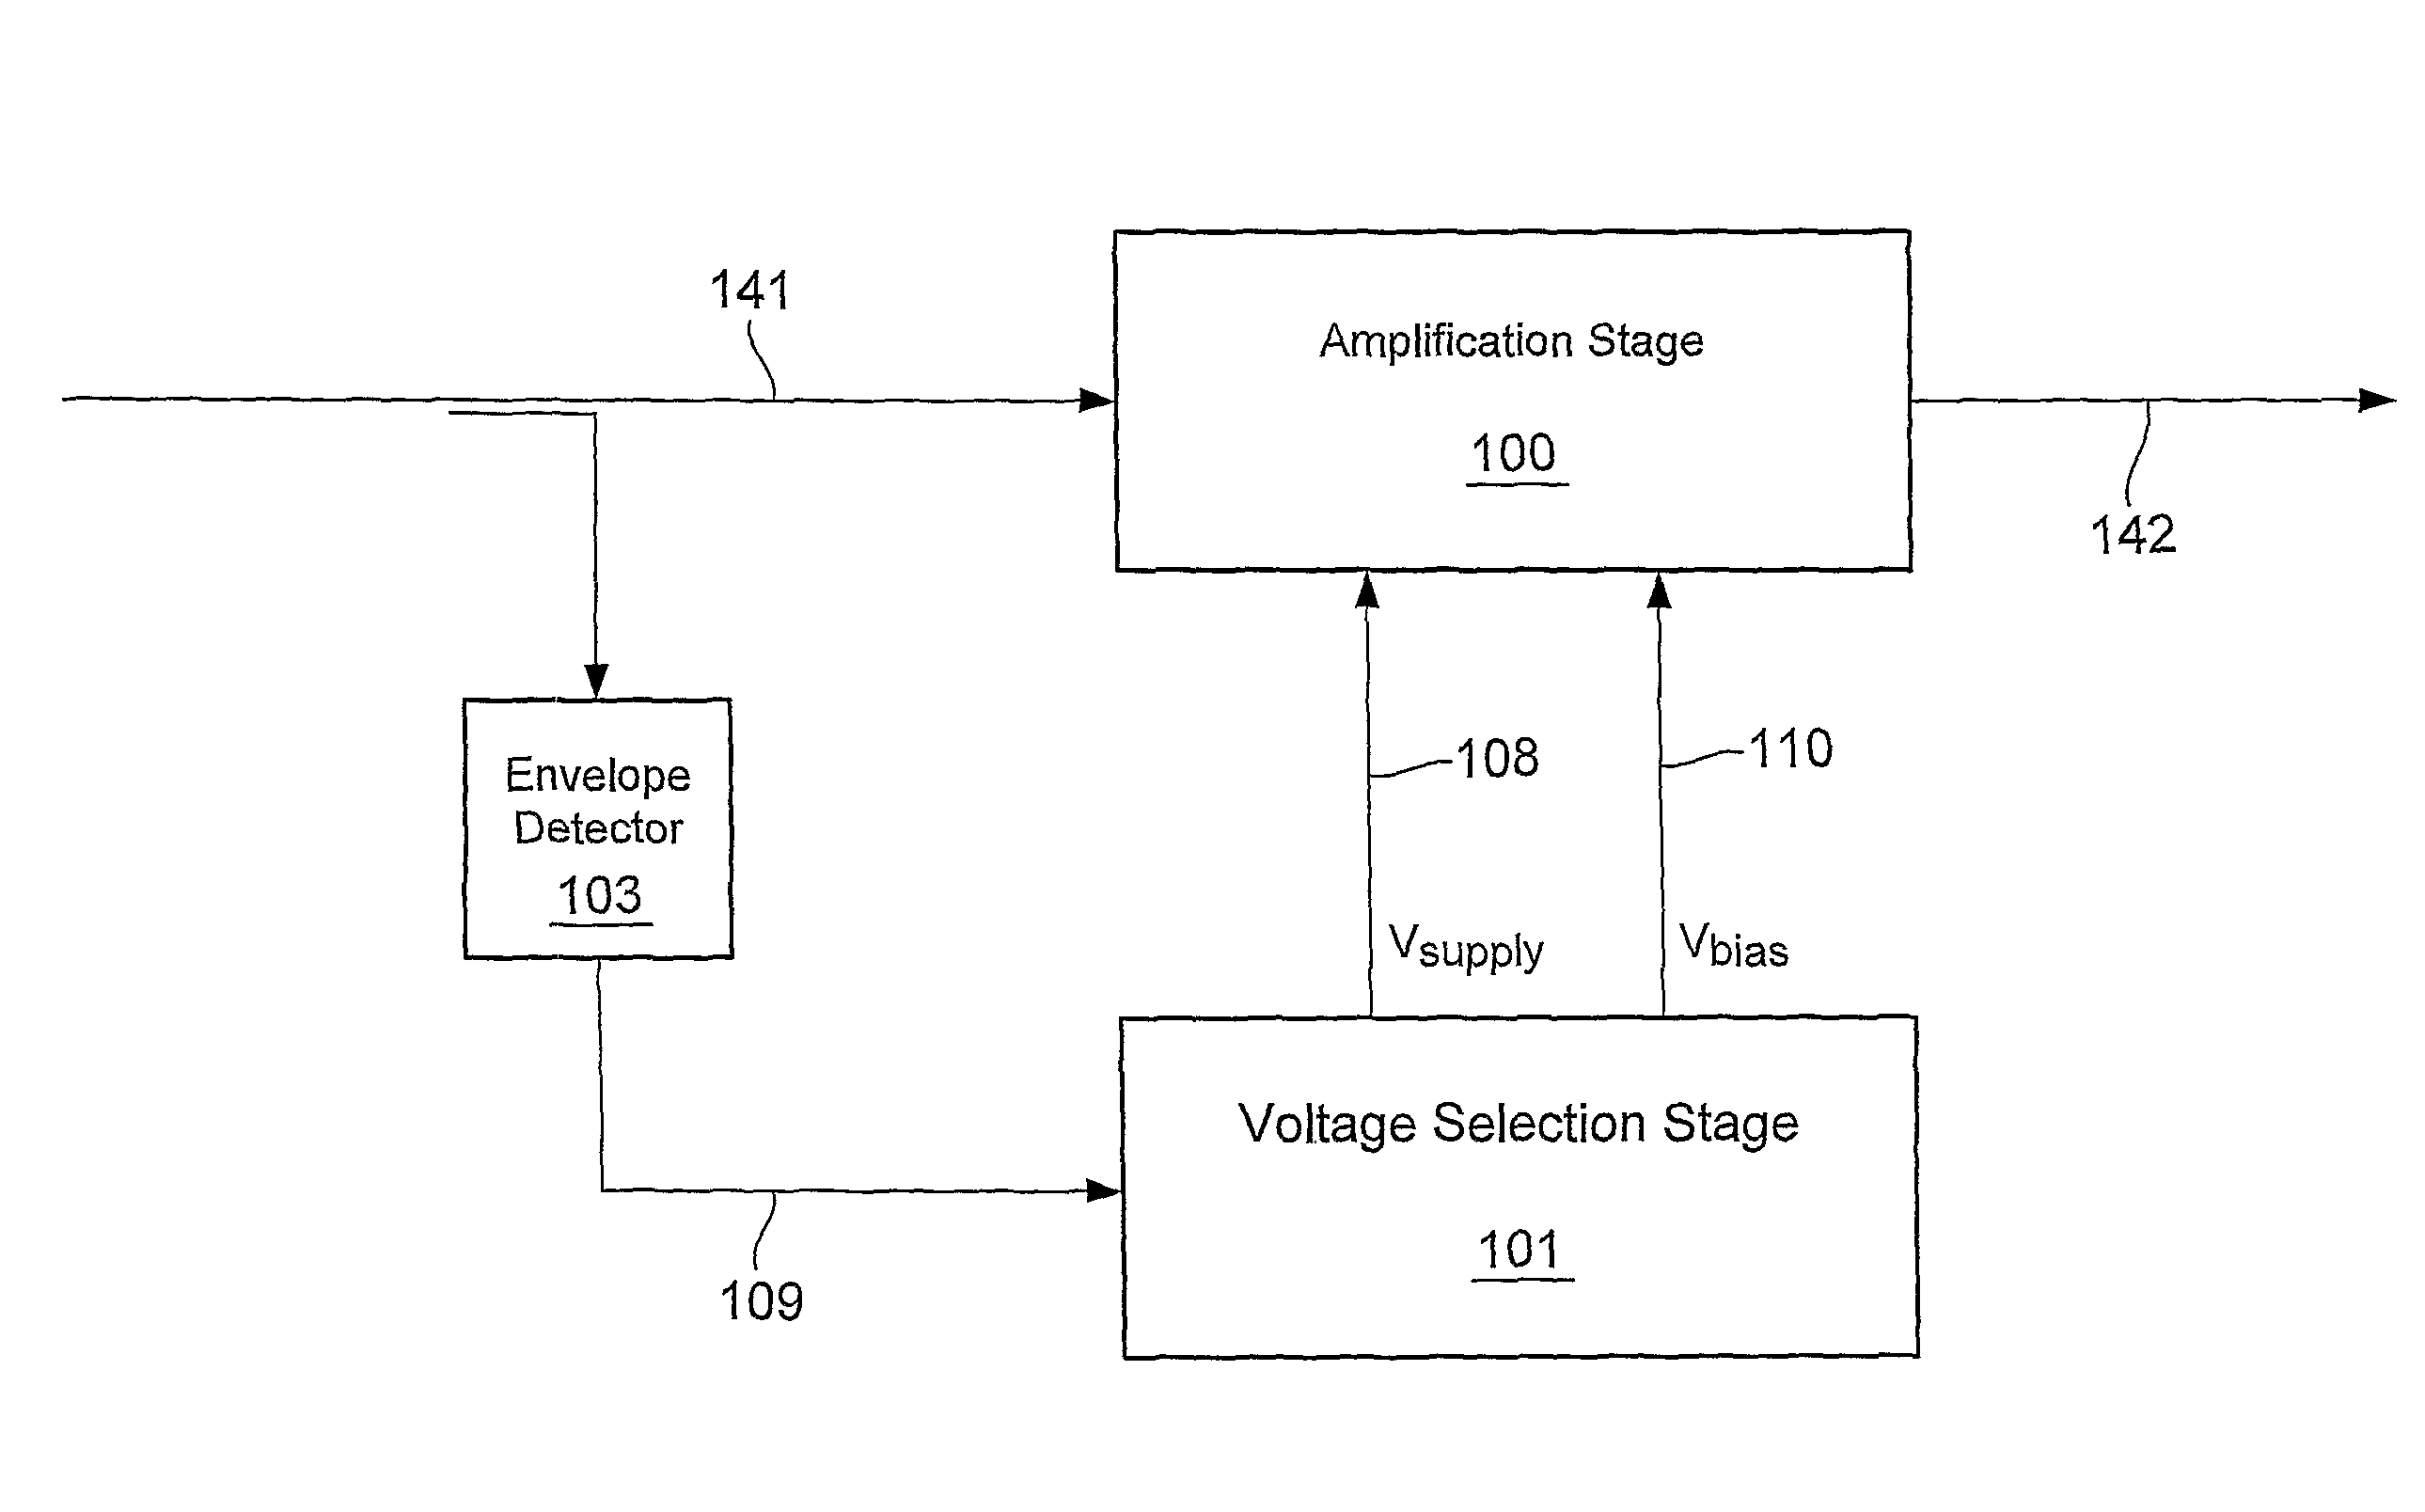 Joint optimisation of supply and bias modulation